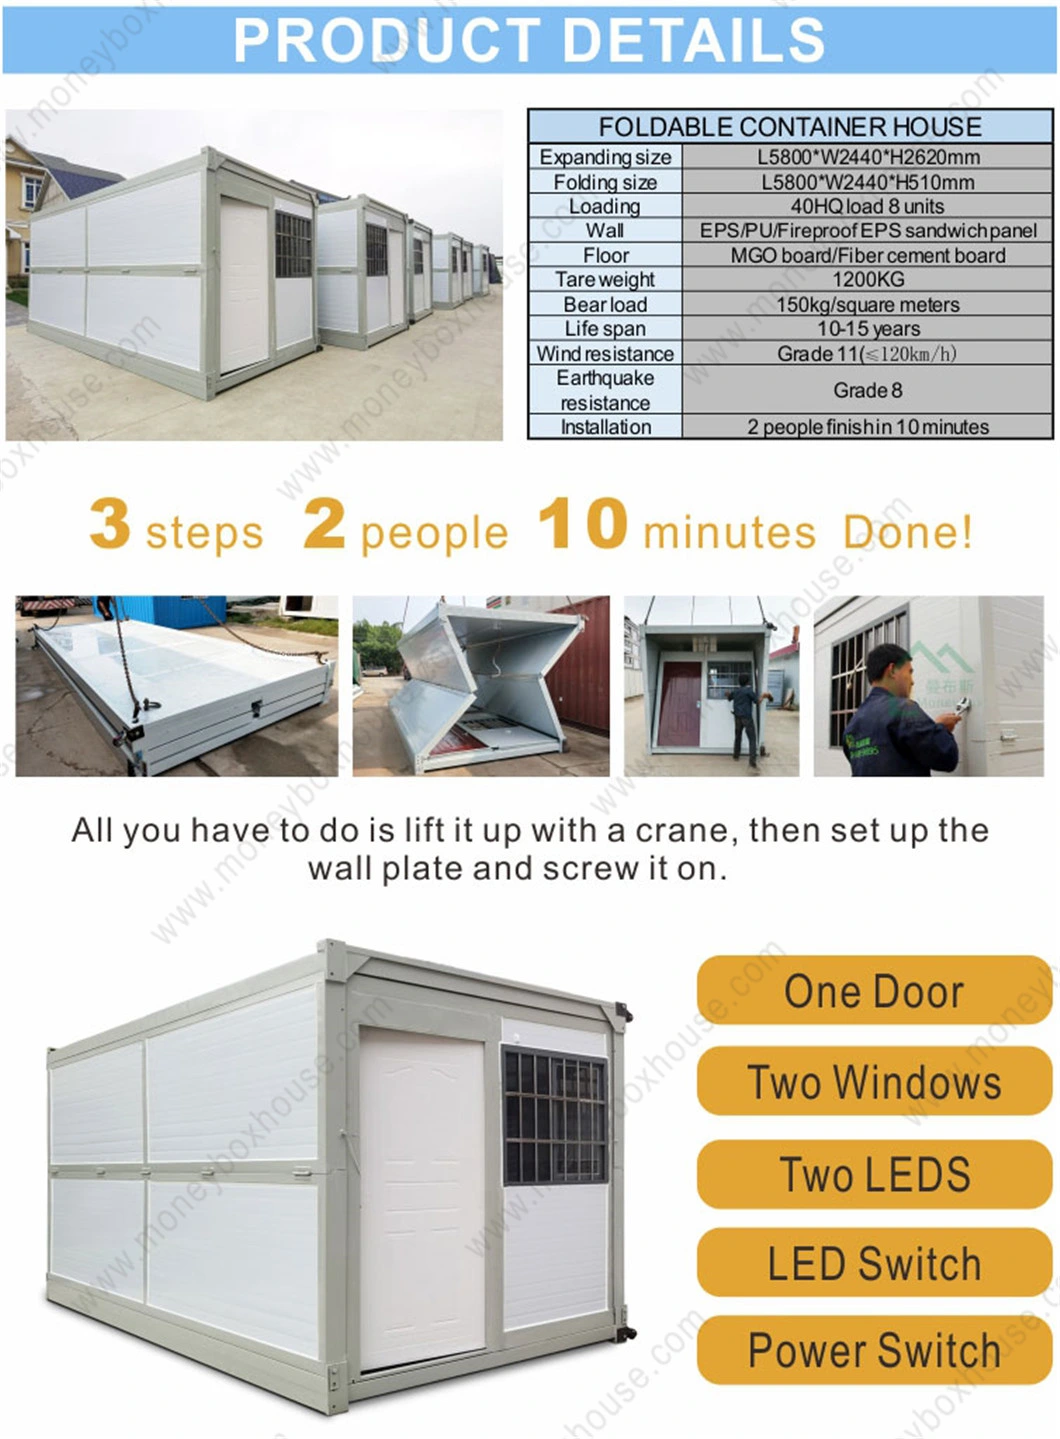 20FT Cheap Portable Prefab Storage Movable Expandable Mobile Prefabricated Fast Assemble Stackable Folding Foldable Container Tiny House Price